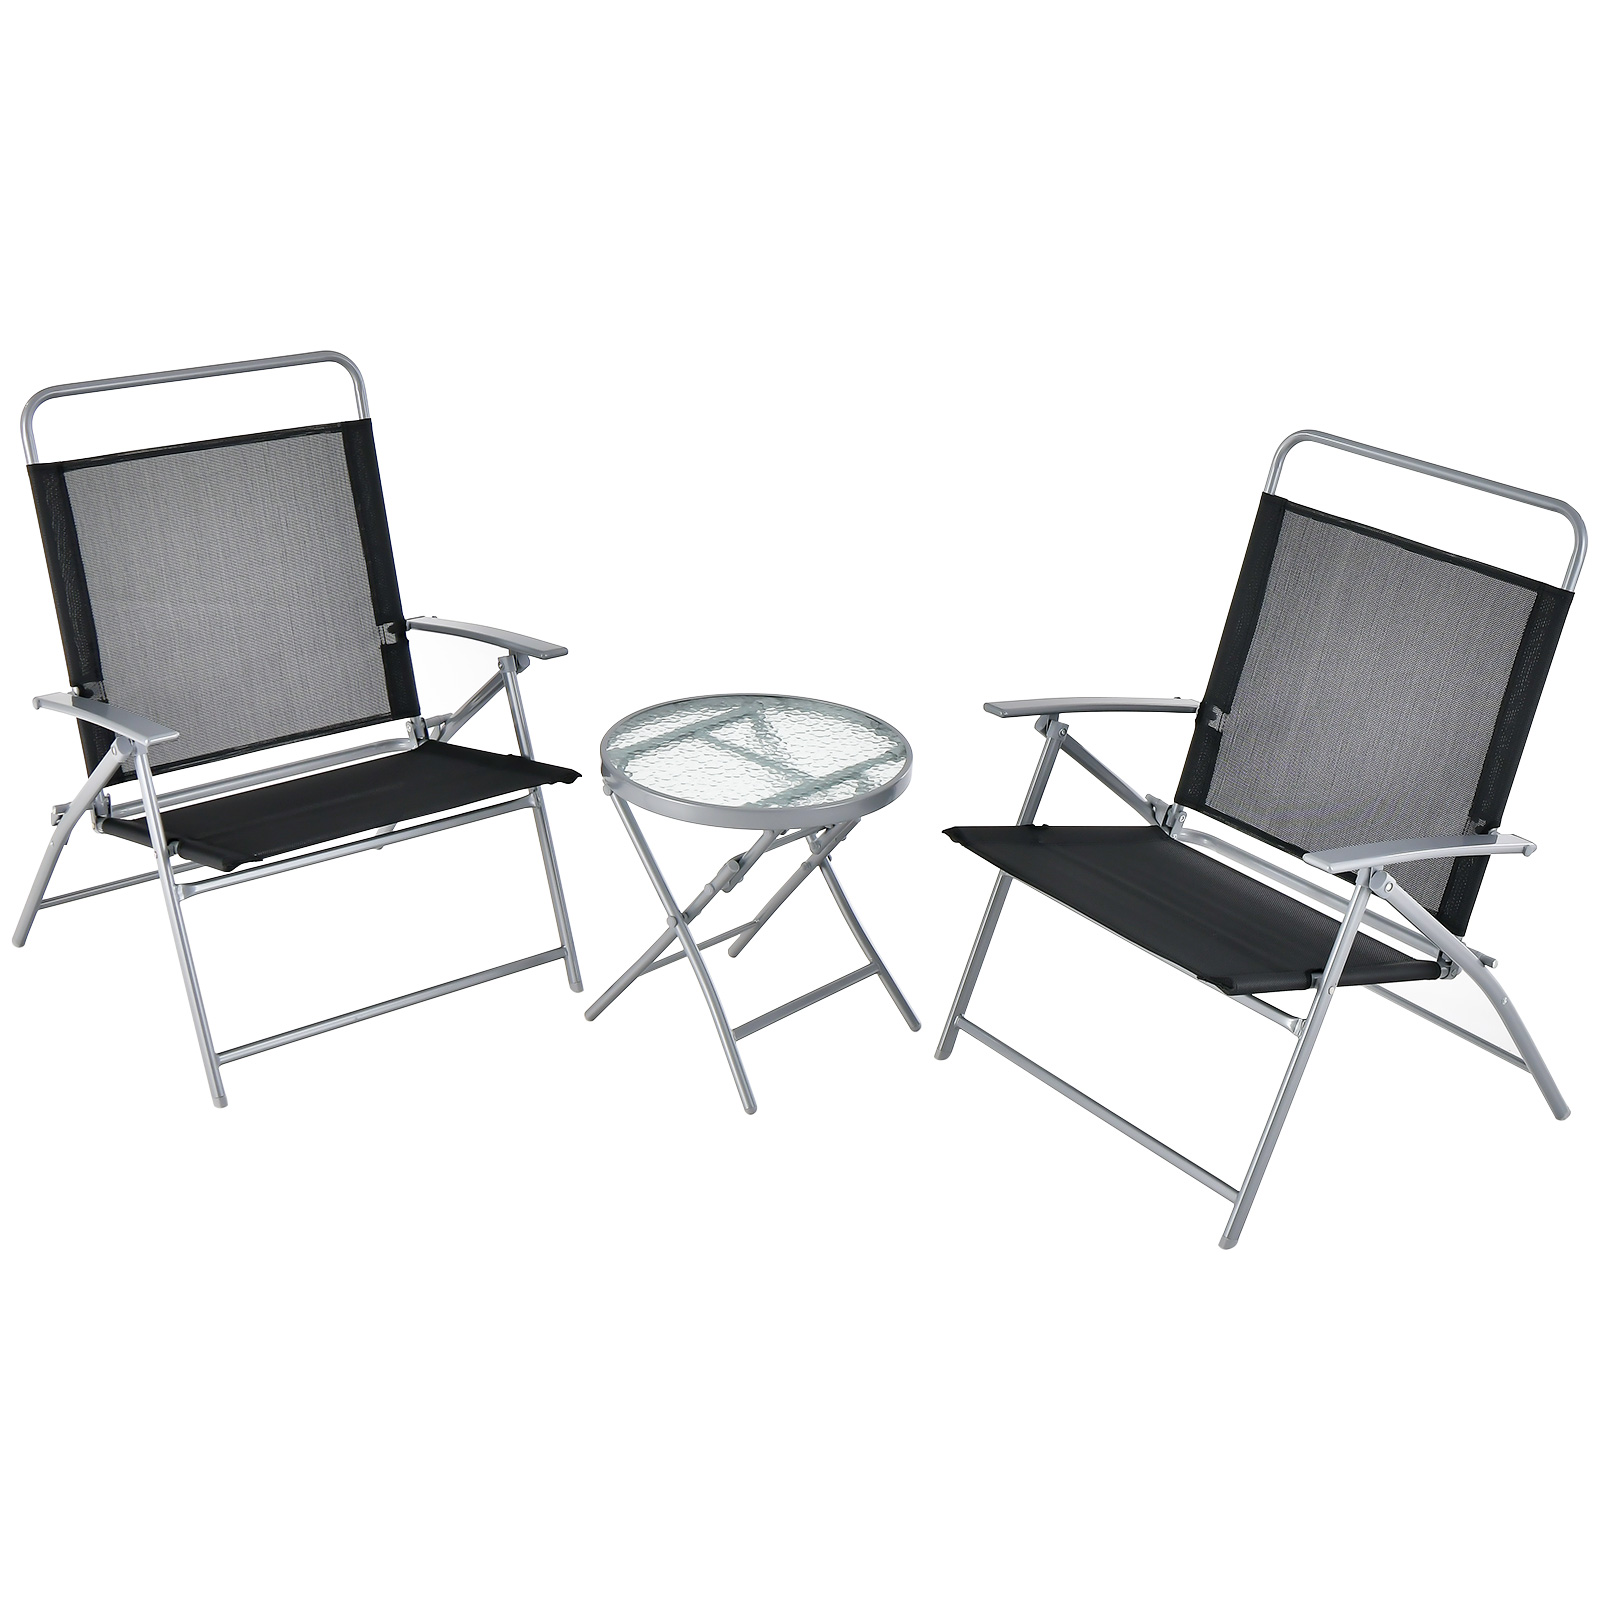 3_Pieces_Patio_Bistro_Set_Foldable_Chairs_and_Table_with_Ripple_like_Glass_Tabletop-8.jpg